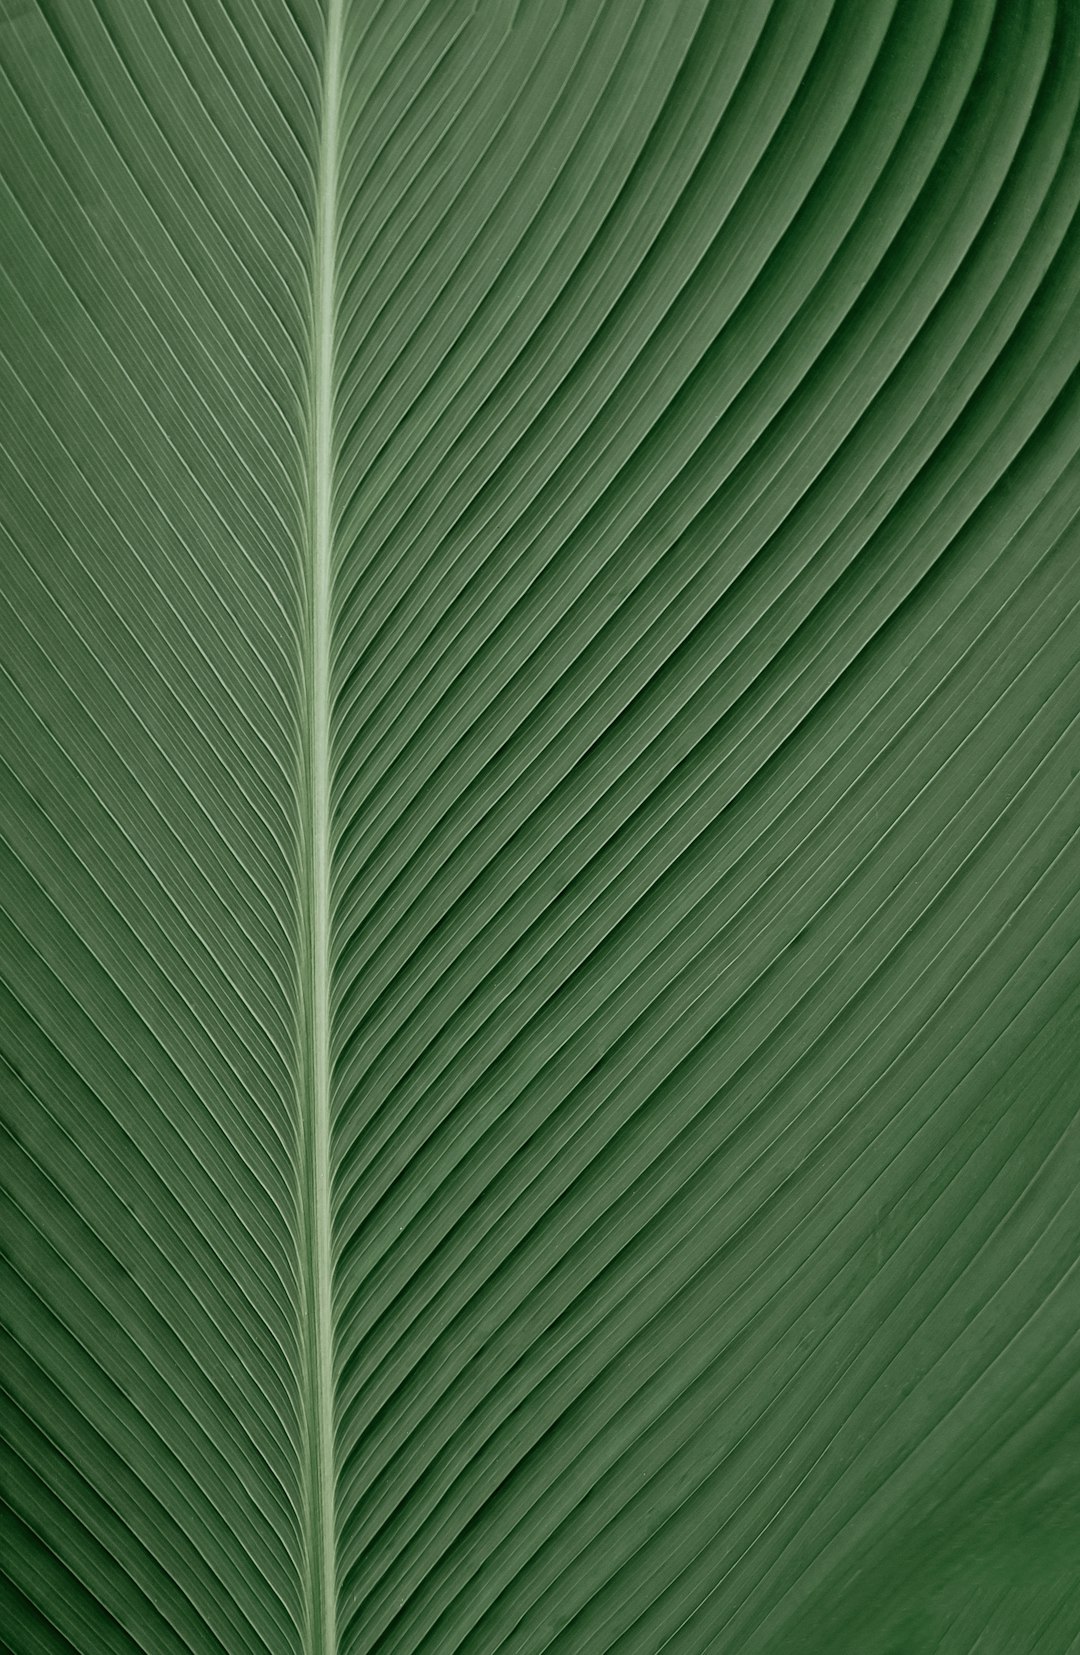  green and white striped textile plants